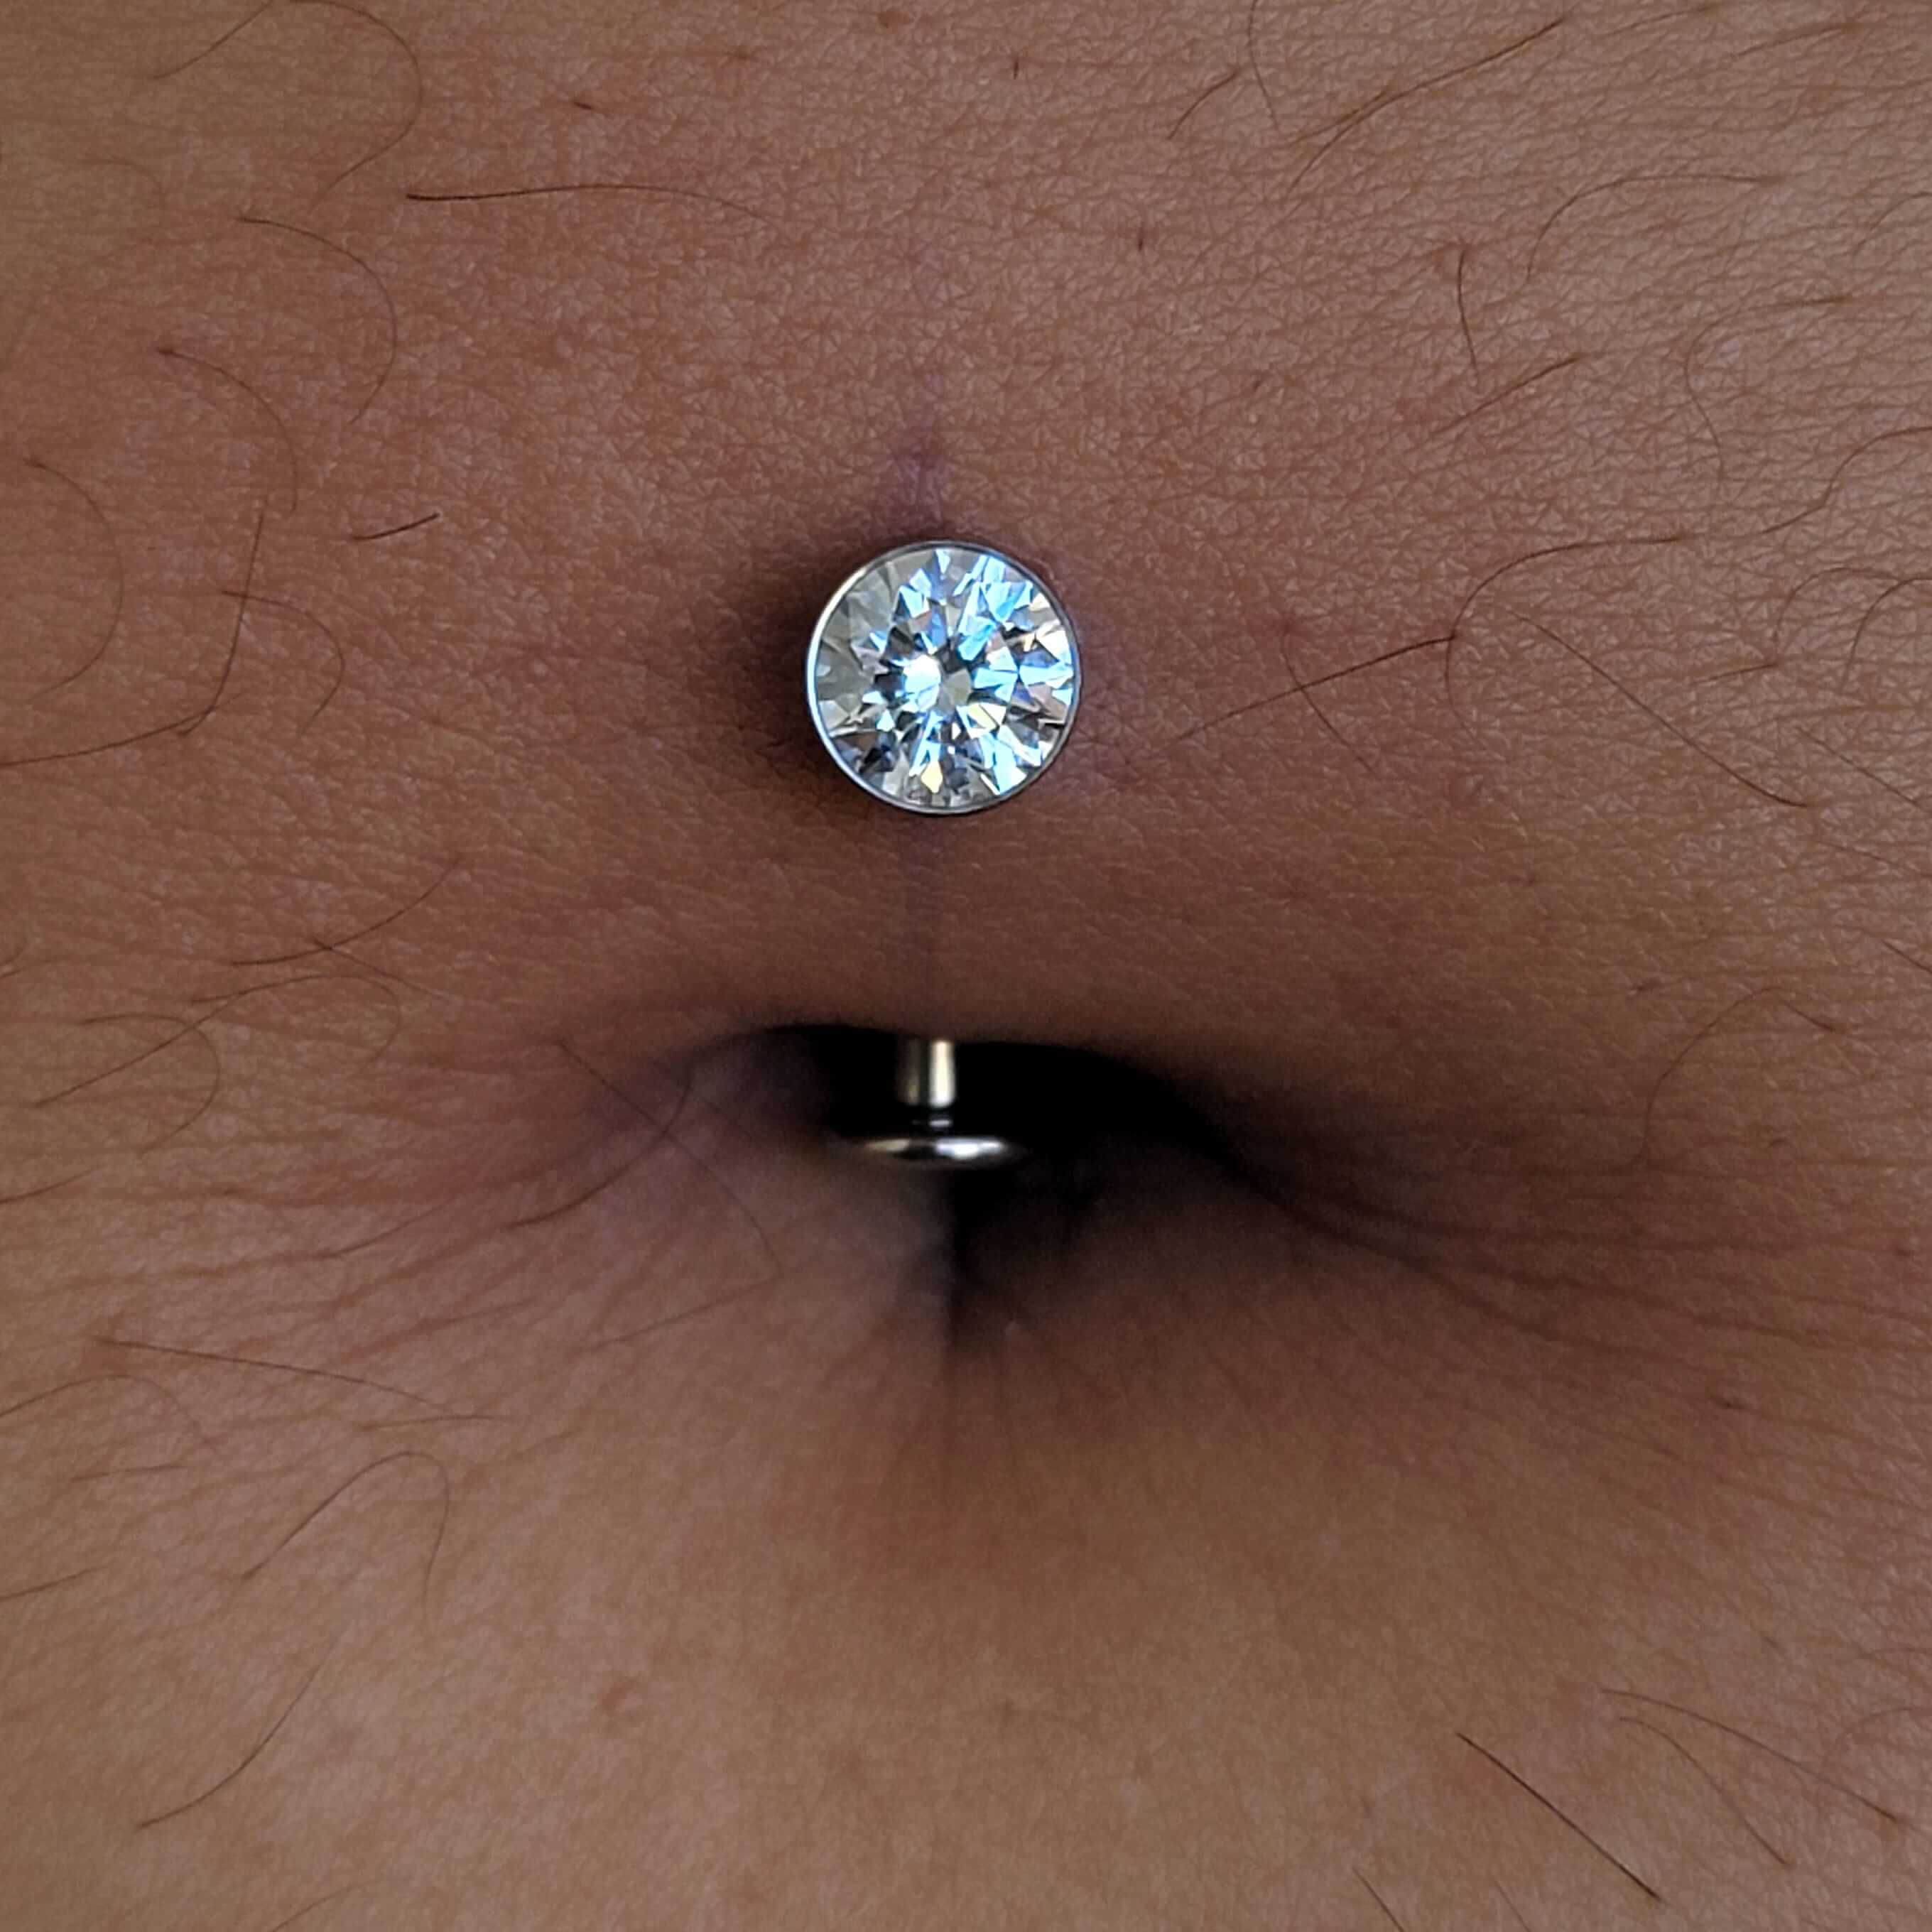 Floating navel piercing done with implant grade titanium